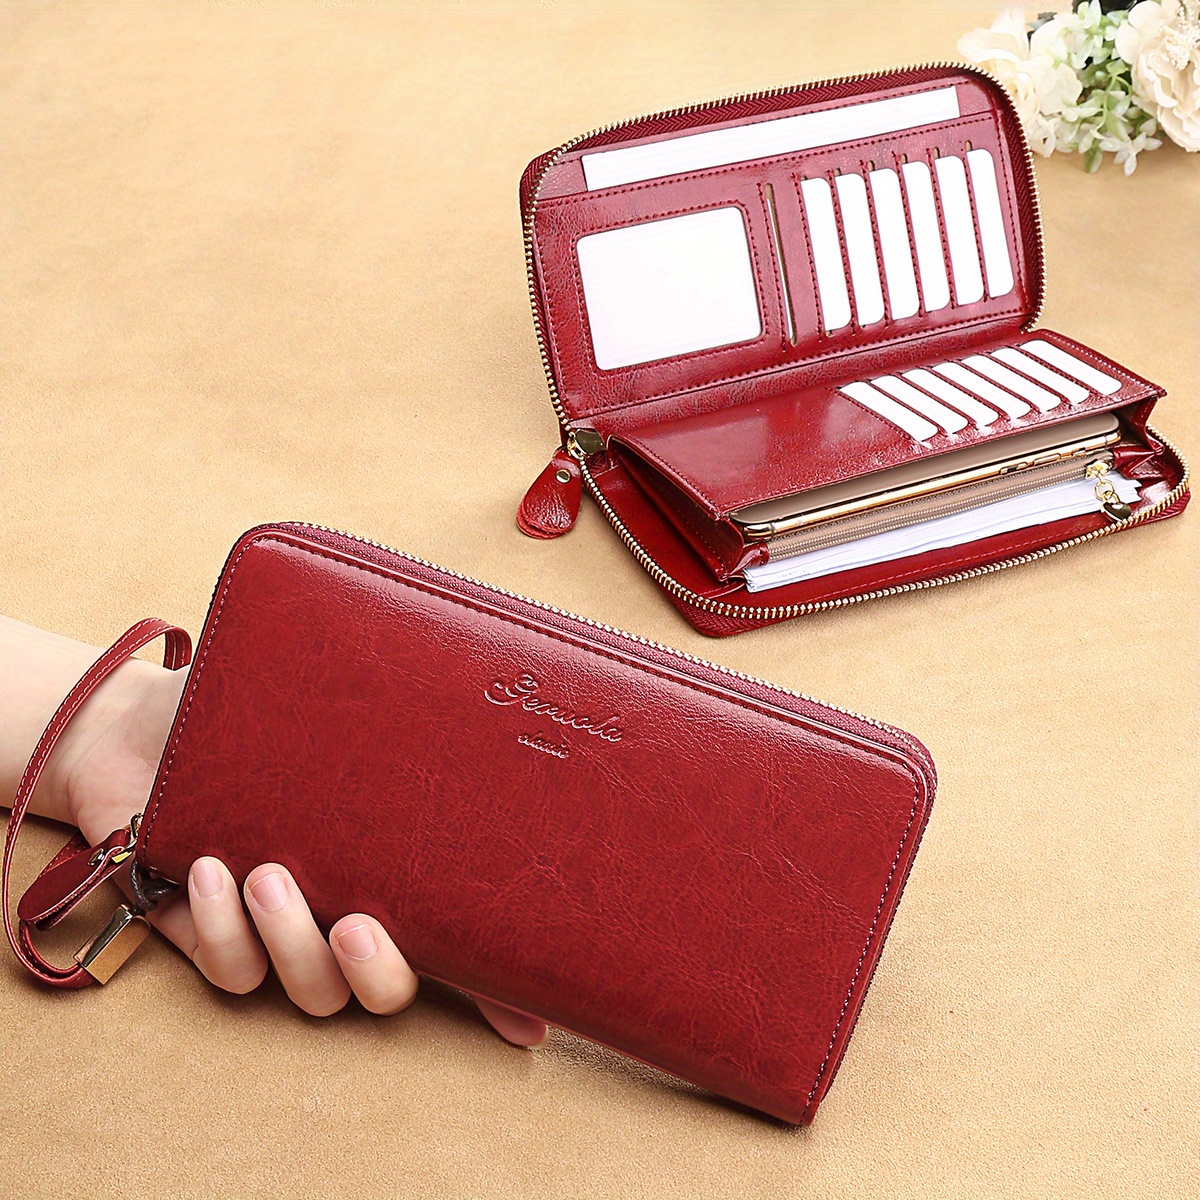 Fashion Women Leather Long Wallets Double Zipper Fashion Casual Design Leather  Clutch Wallet Purse Female Large Capacity Card Holder